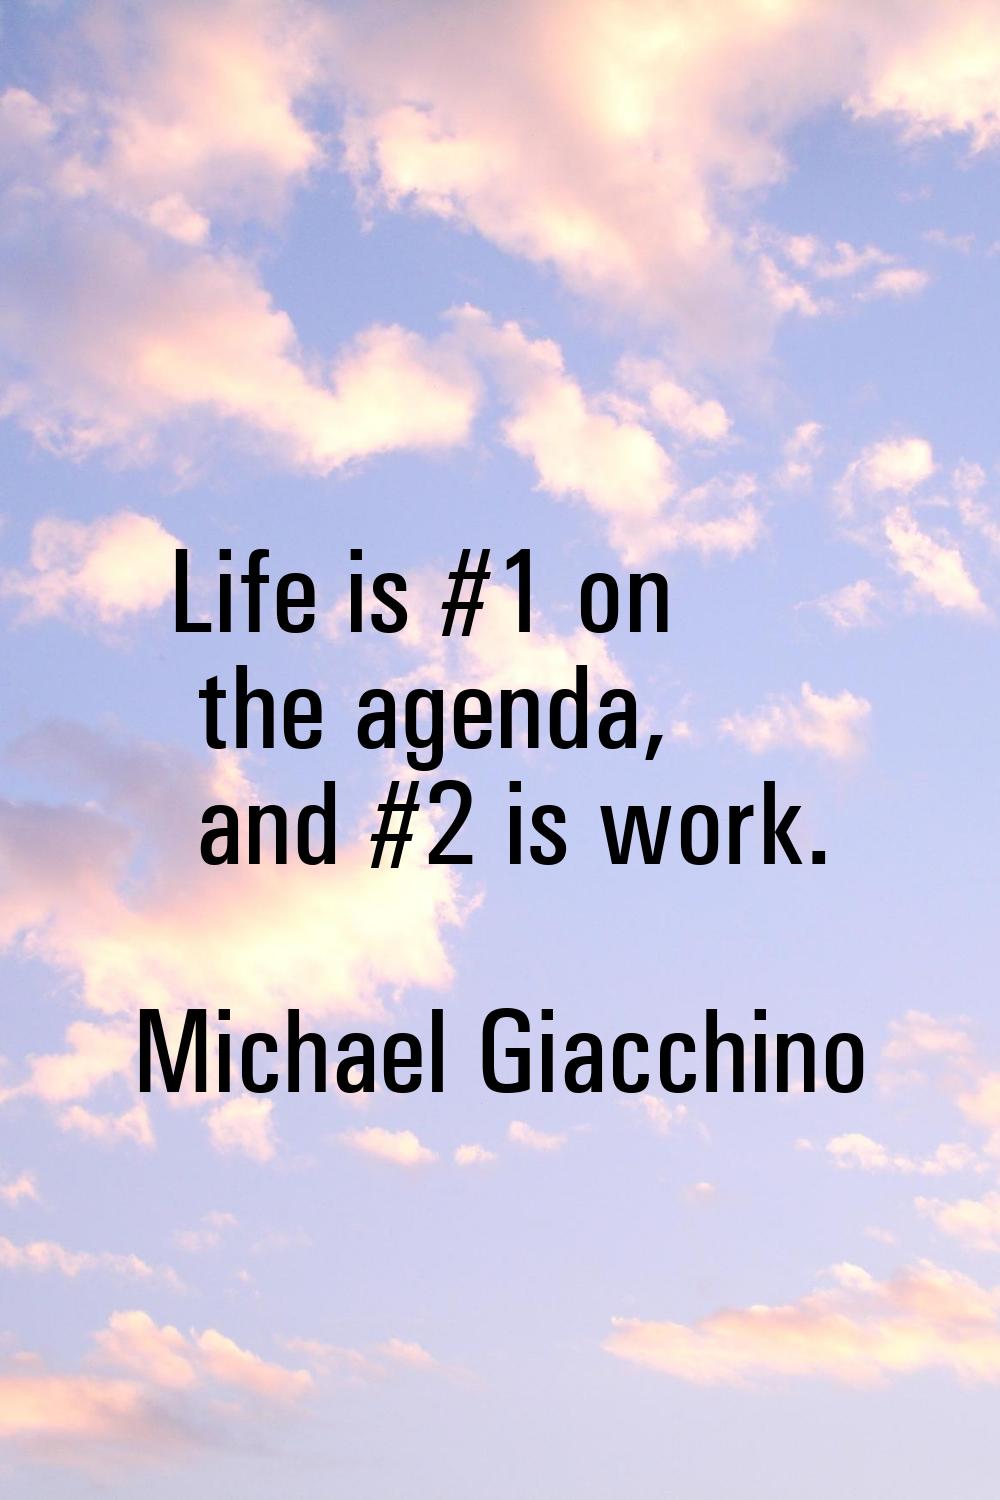 Life is #1 on the agenda, and #2 is work.